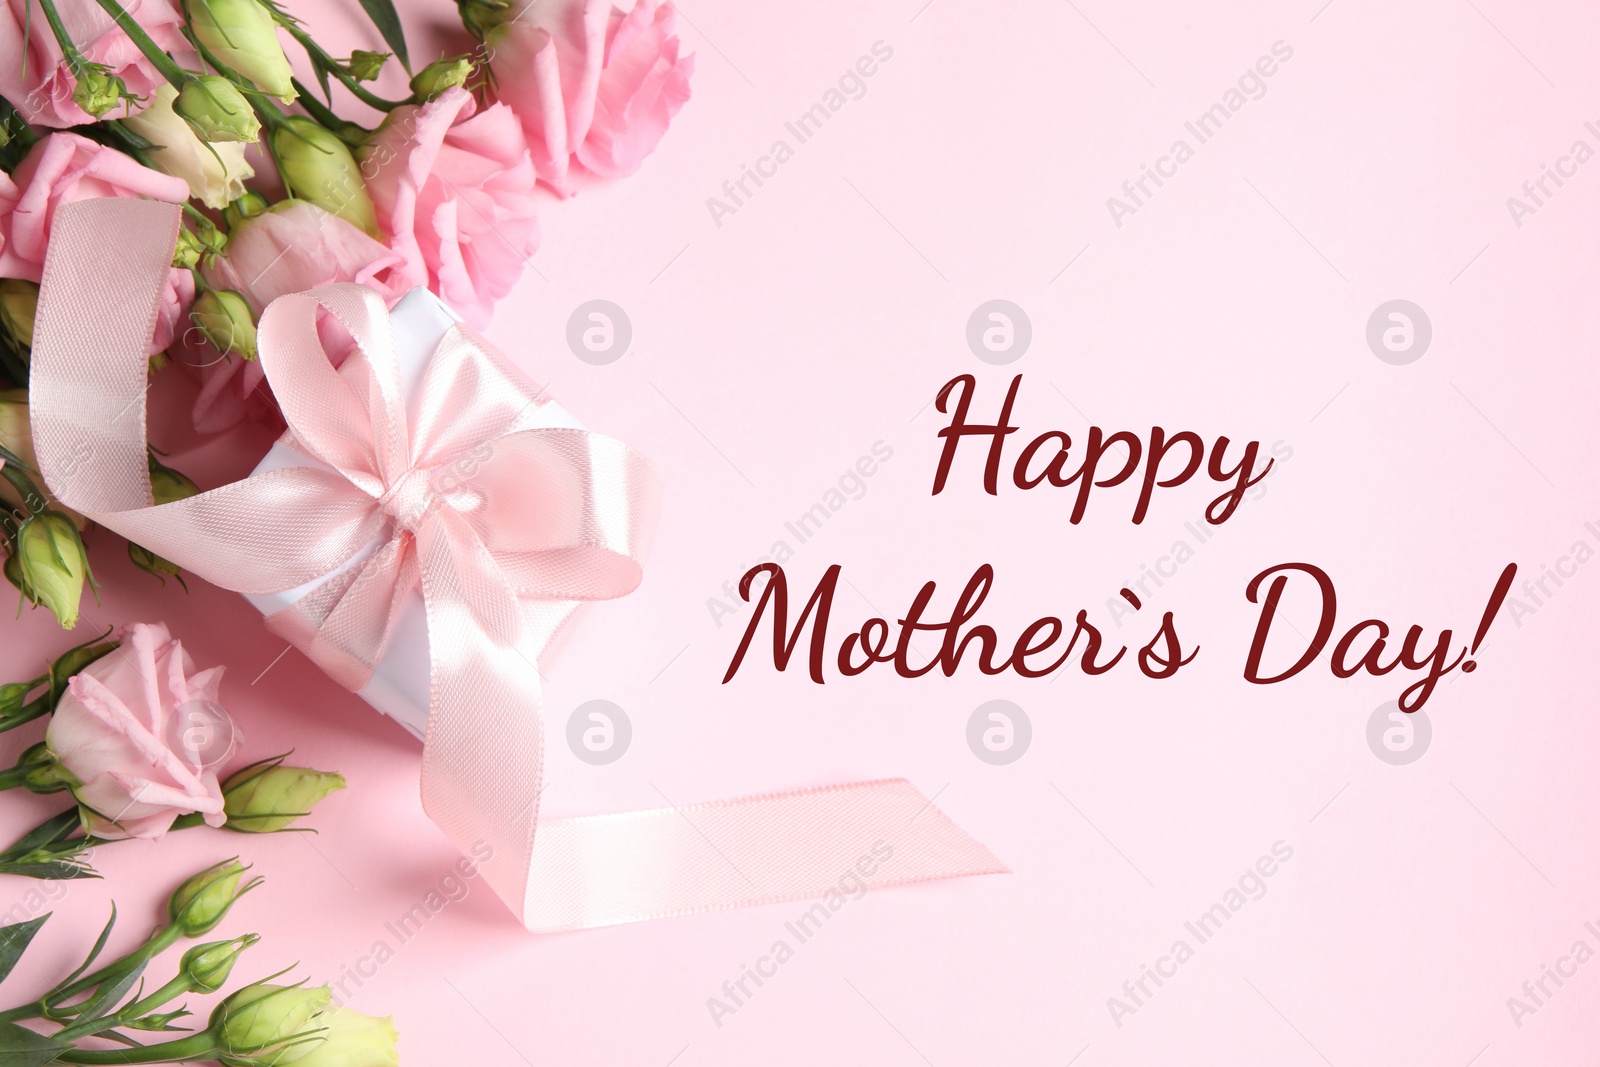 Image of Happy Mother's Day greeting card. Beautiful flowers and gift box on pink background